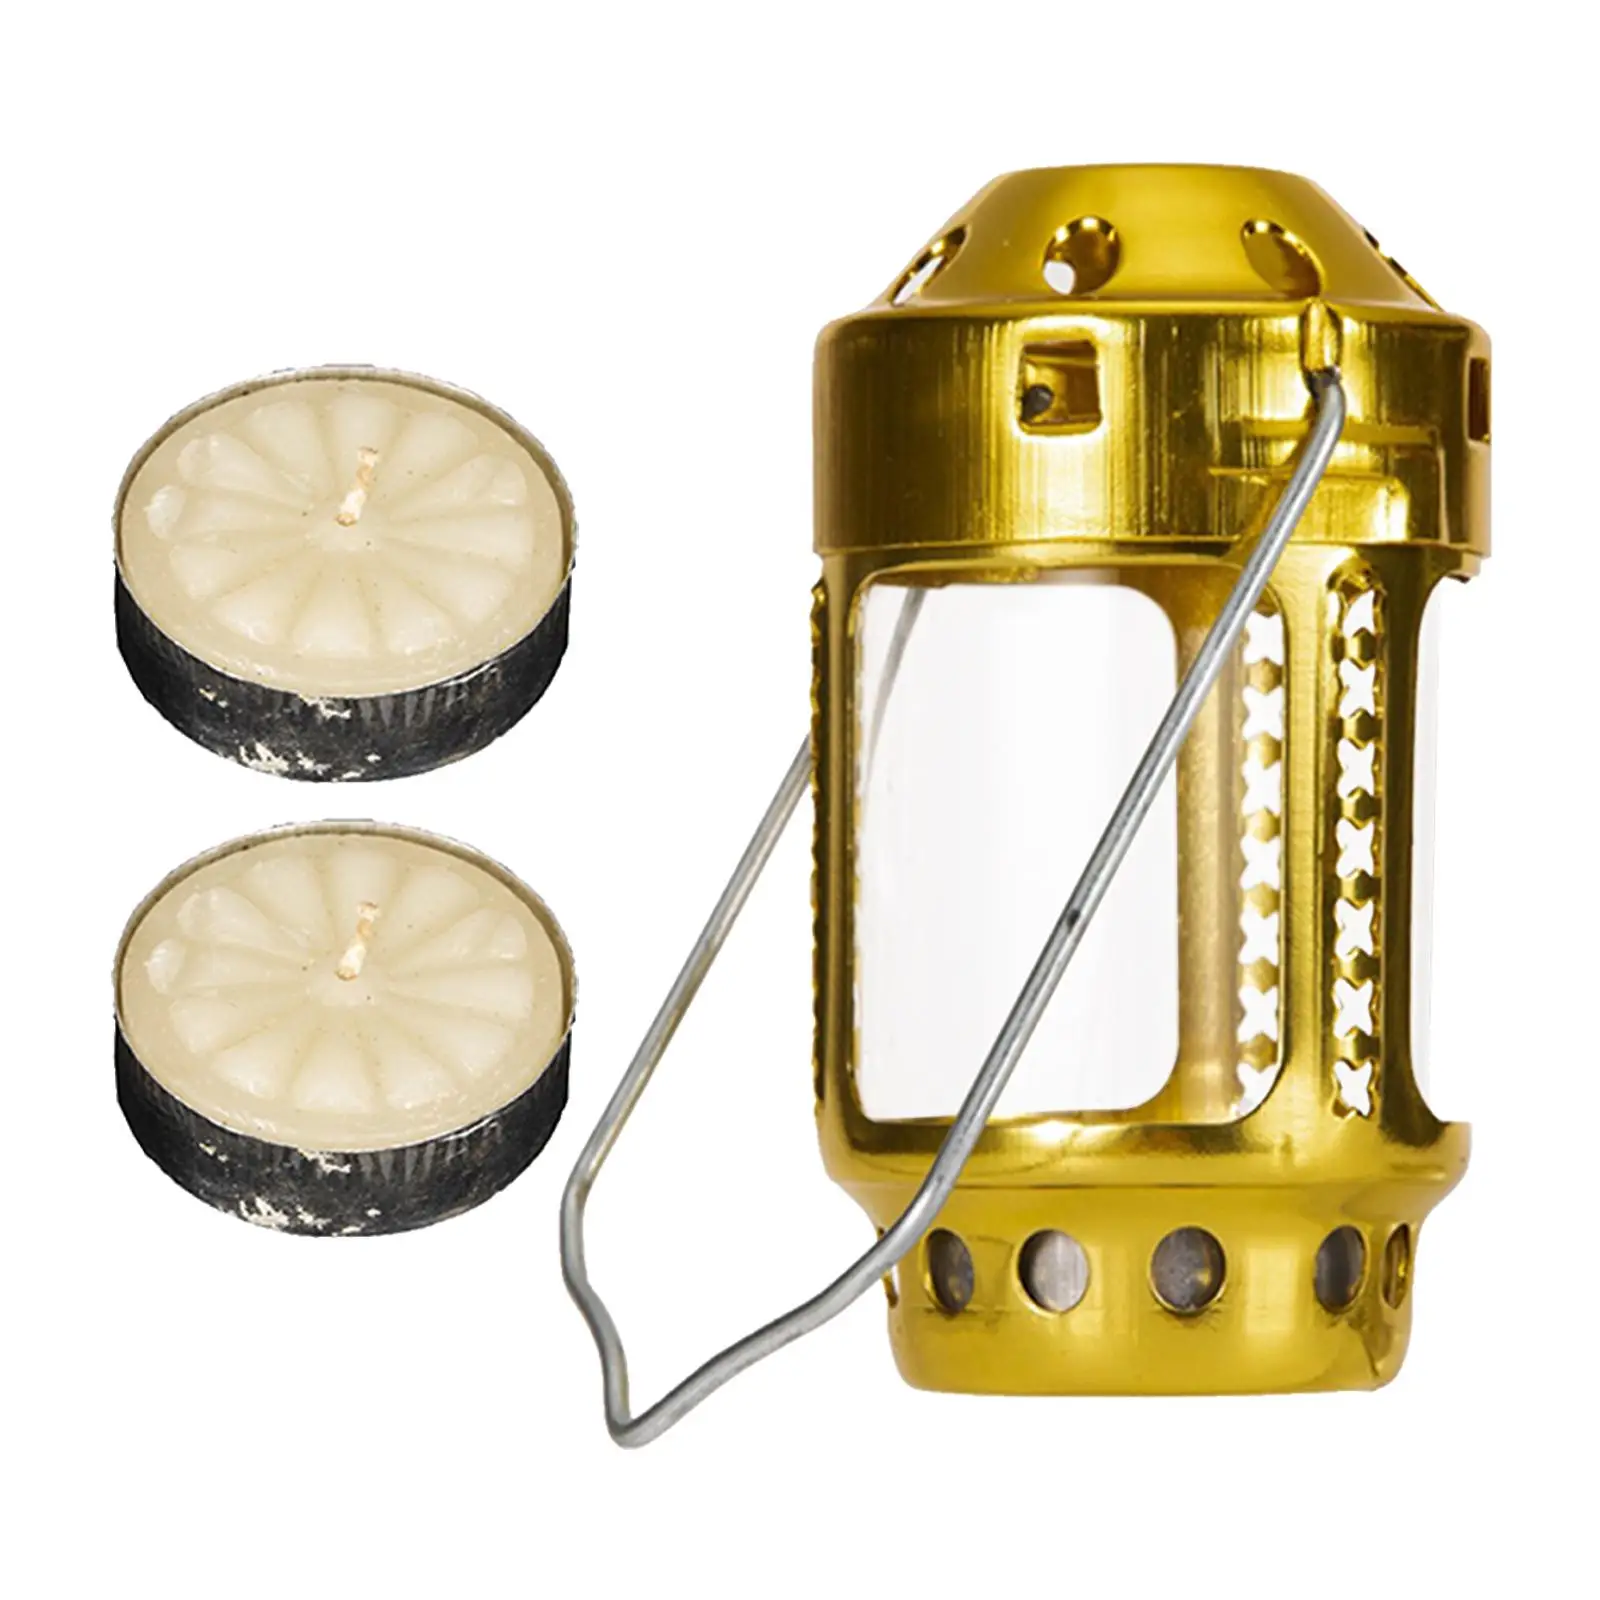 Aluminum Alloy Tealight Holder Hanging Lantern Decorative Tent Lamps for Camping